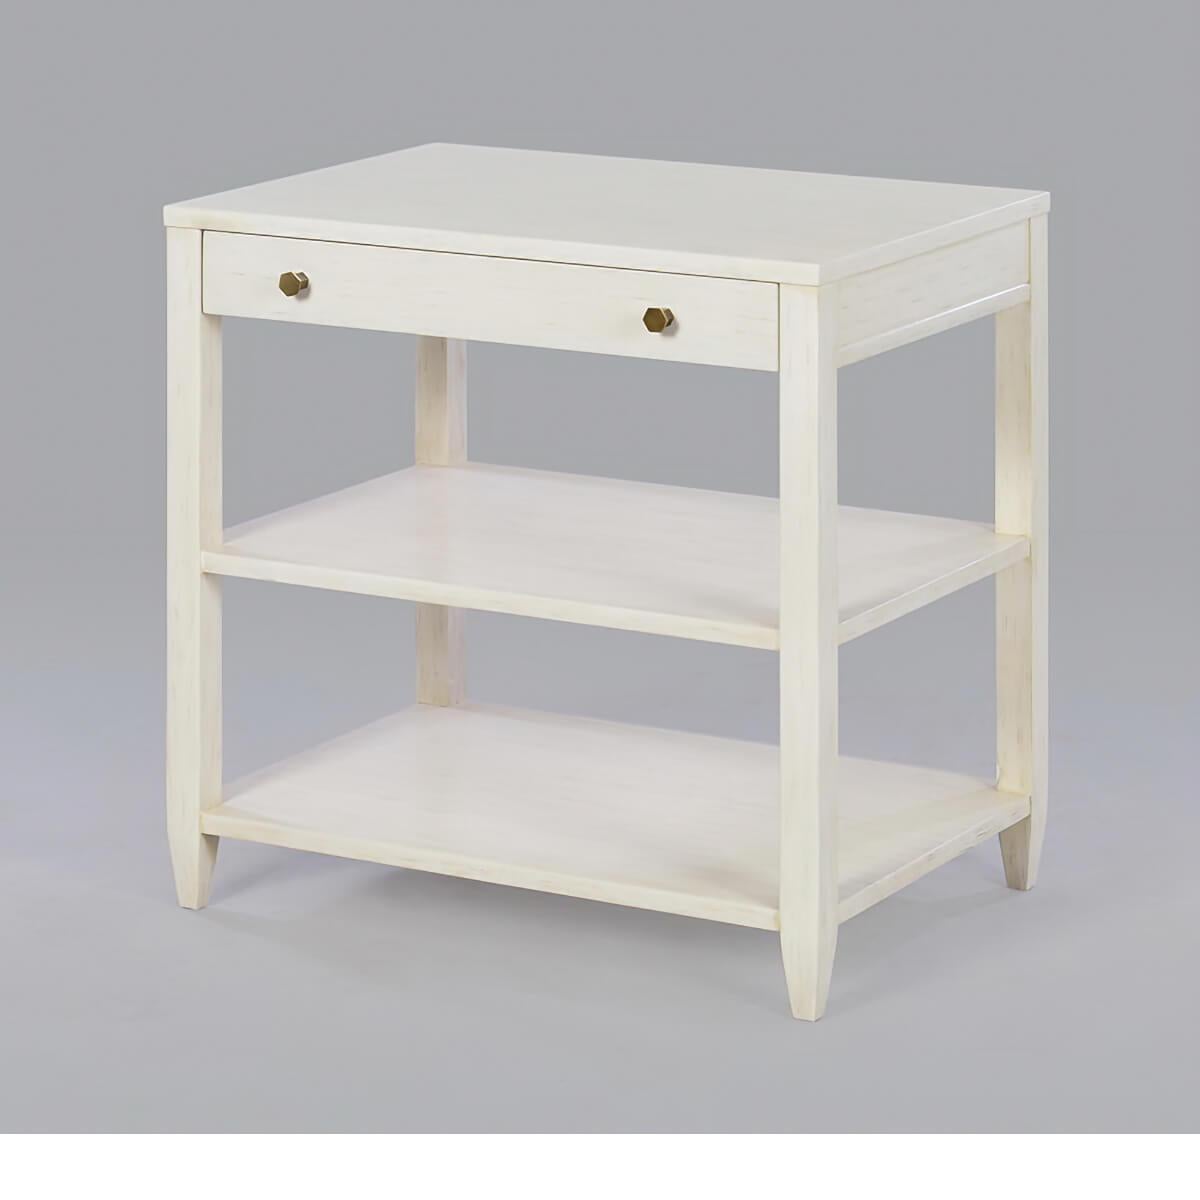 Classic Wide Side Table, Rustic White In New Condition For Sale In Westwood, NJ